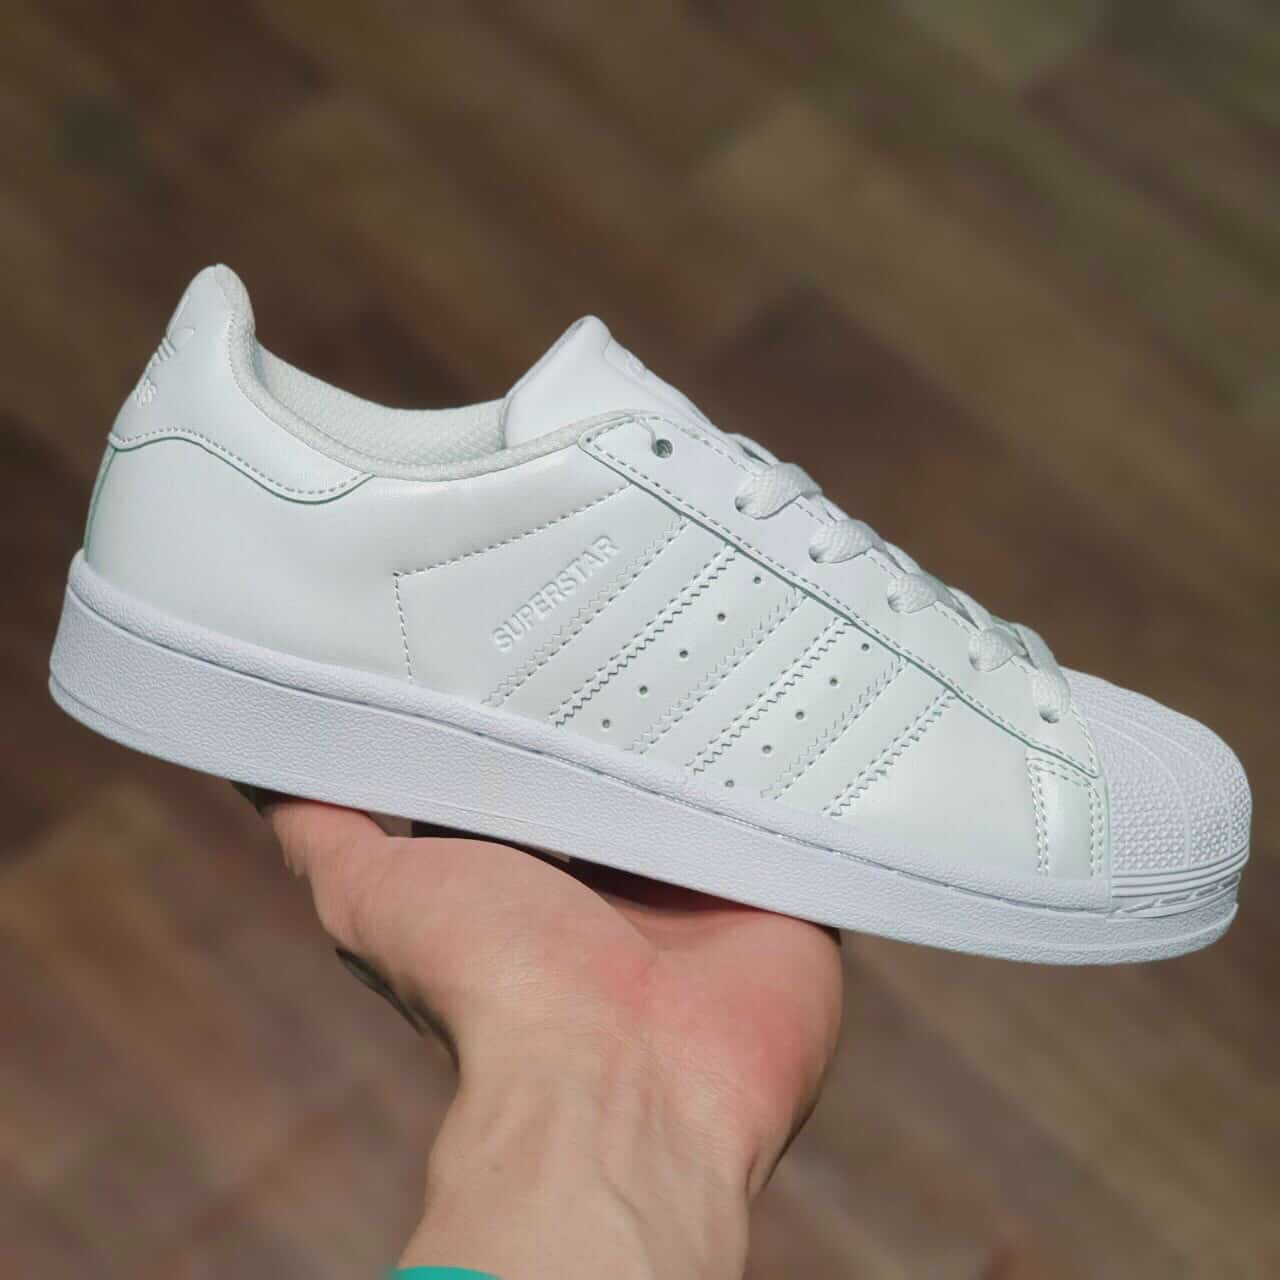 Adidas Superstar All White Rep 1:1